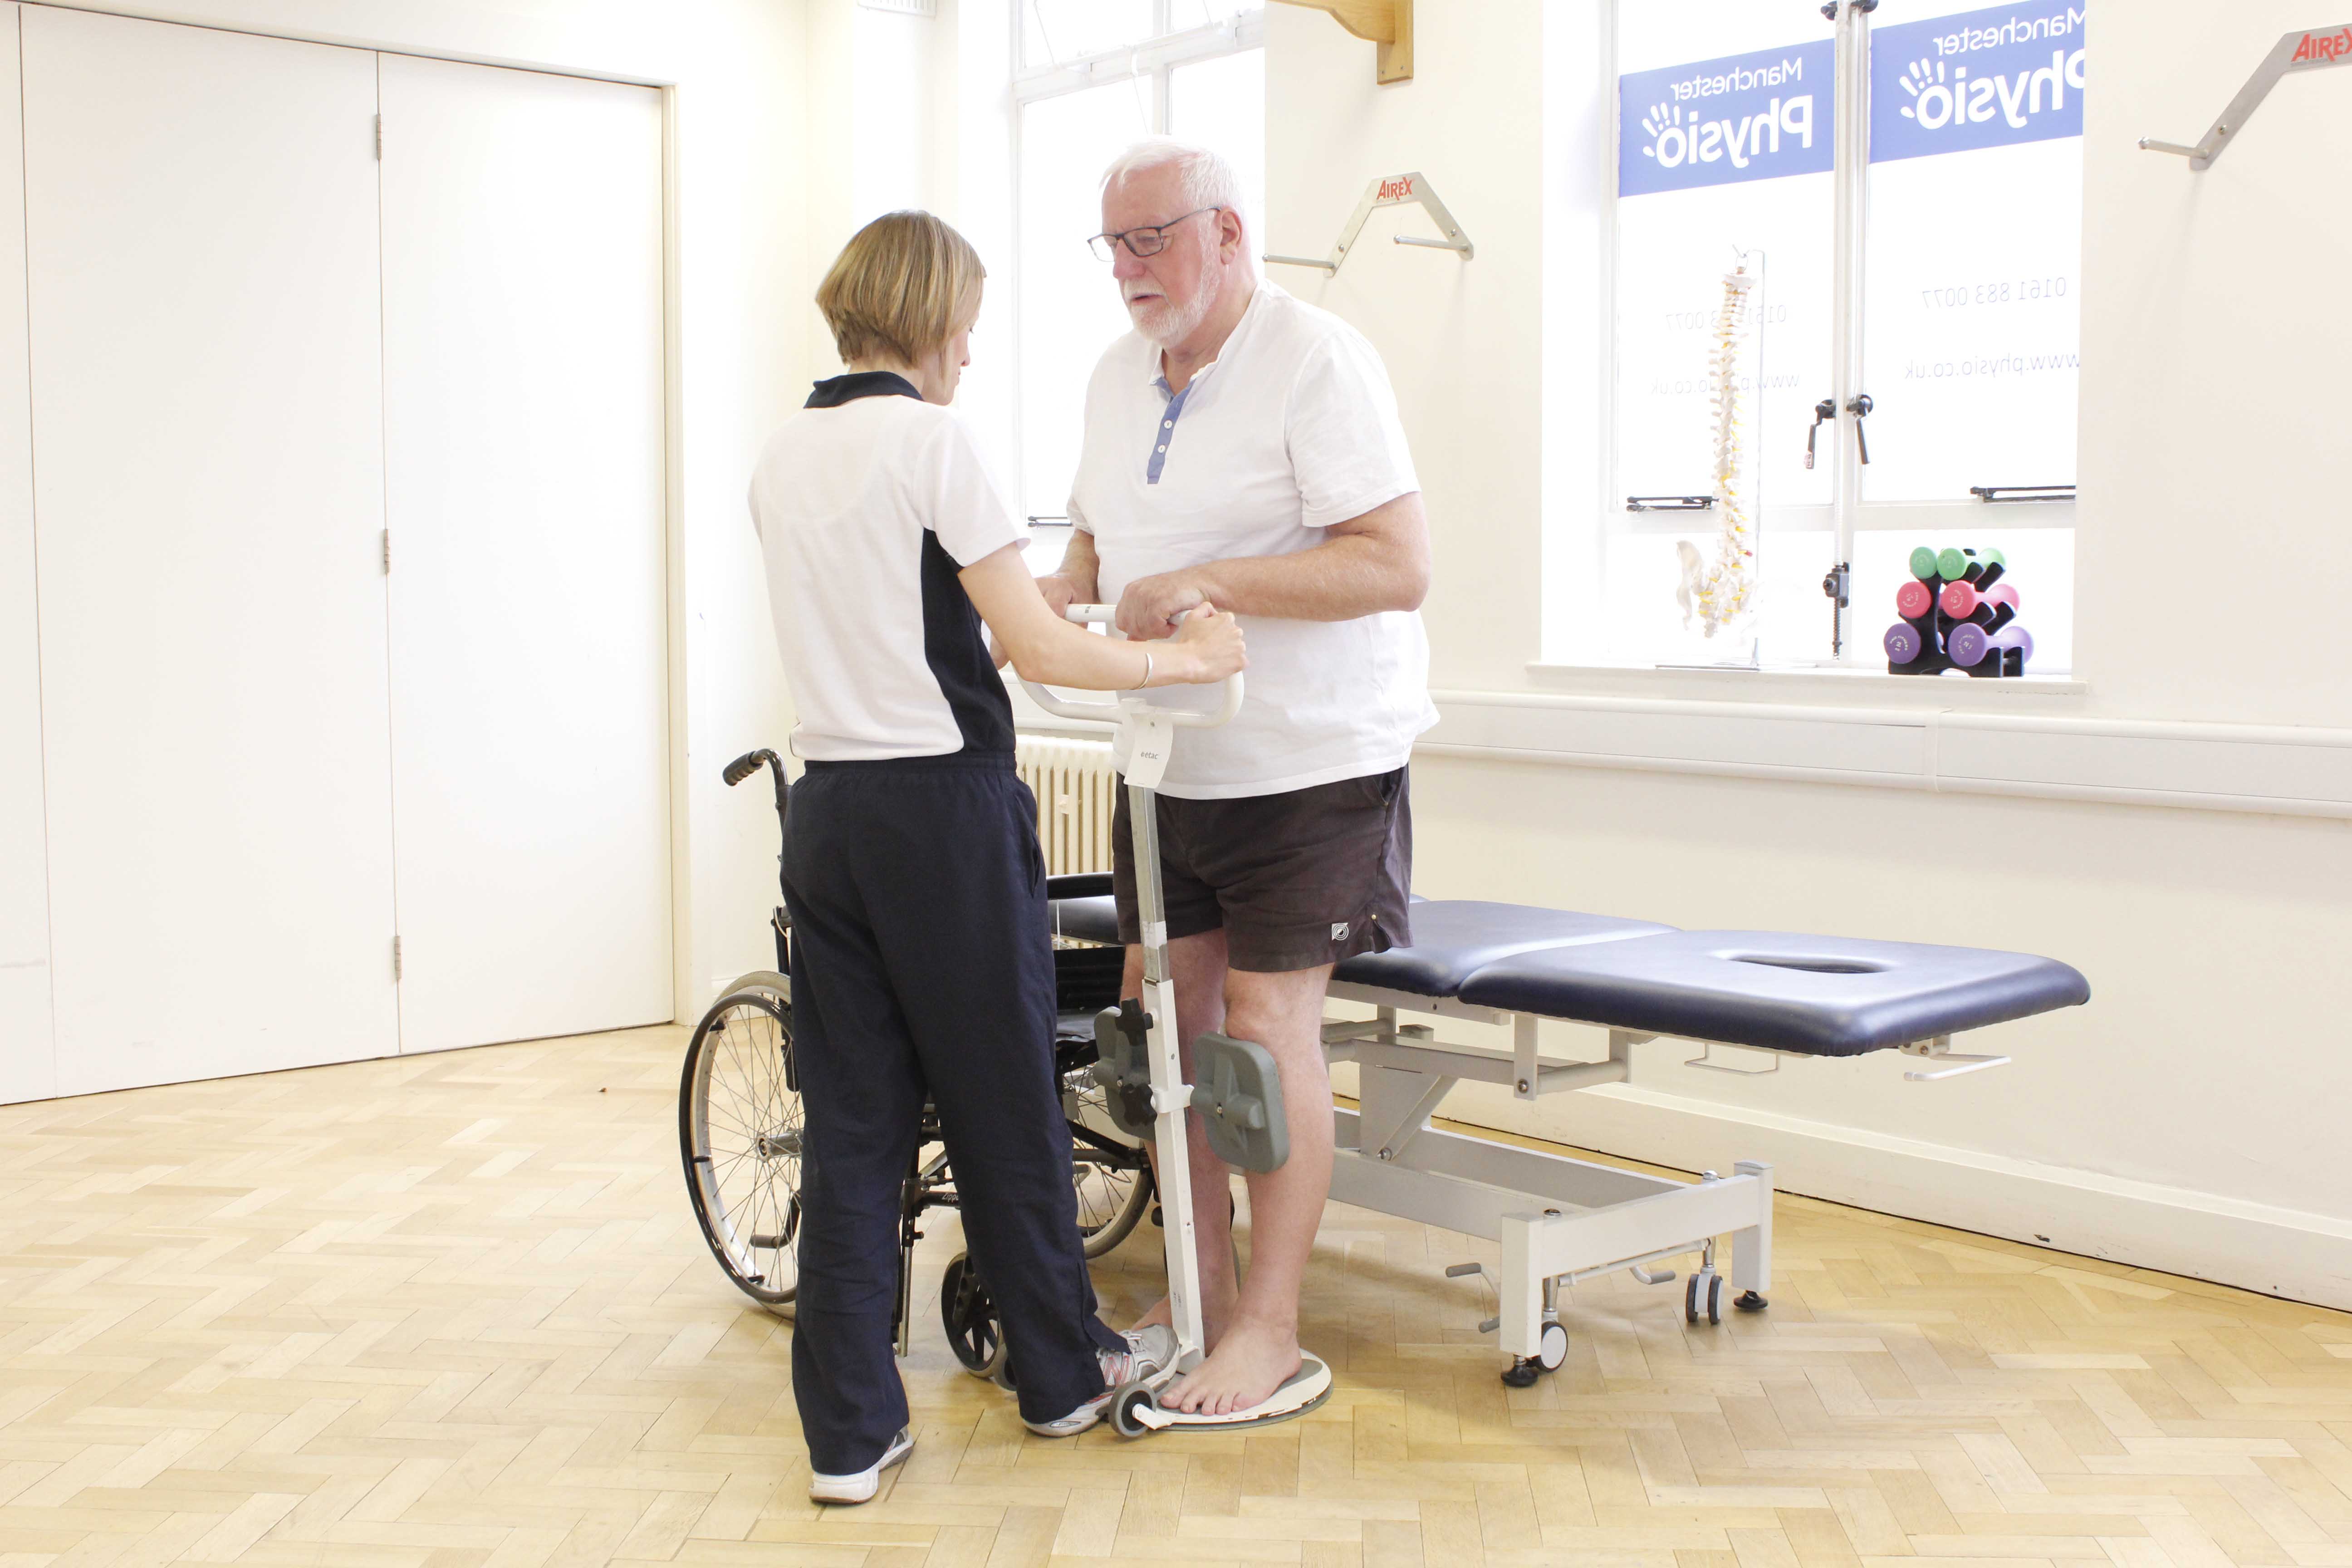 Transfering from a wheel chair to a bed using a rotator frame and assistance of a physiotherapist